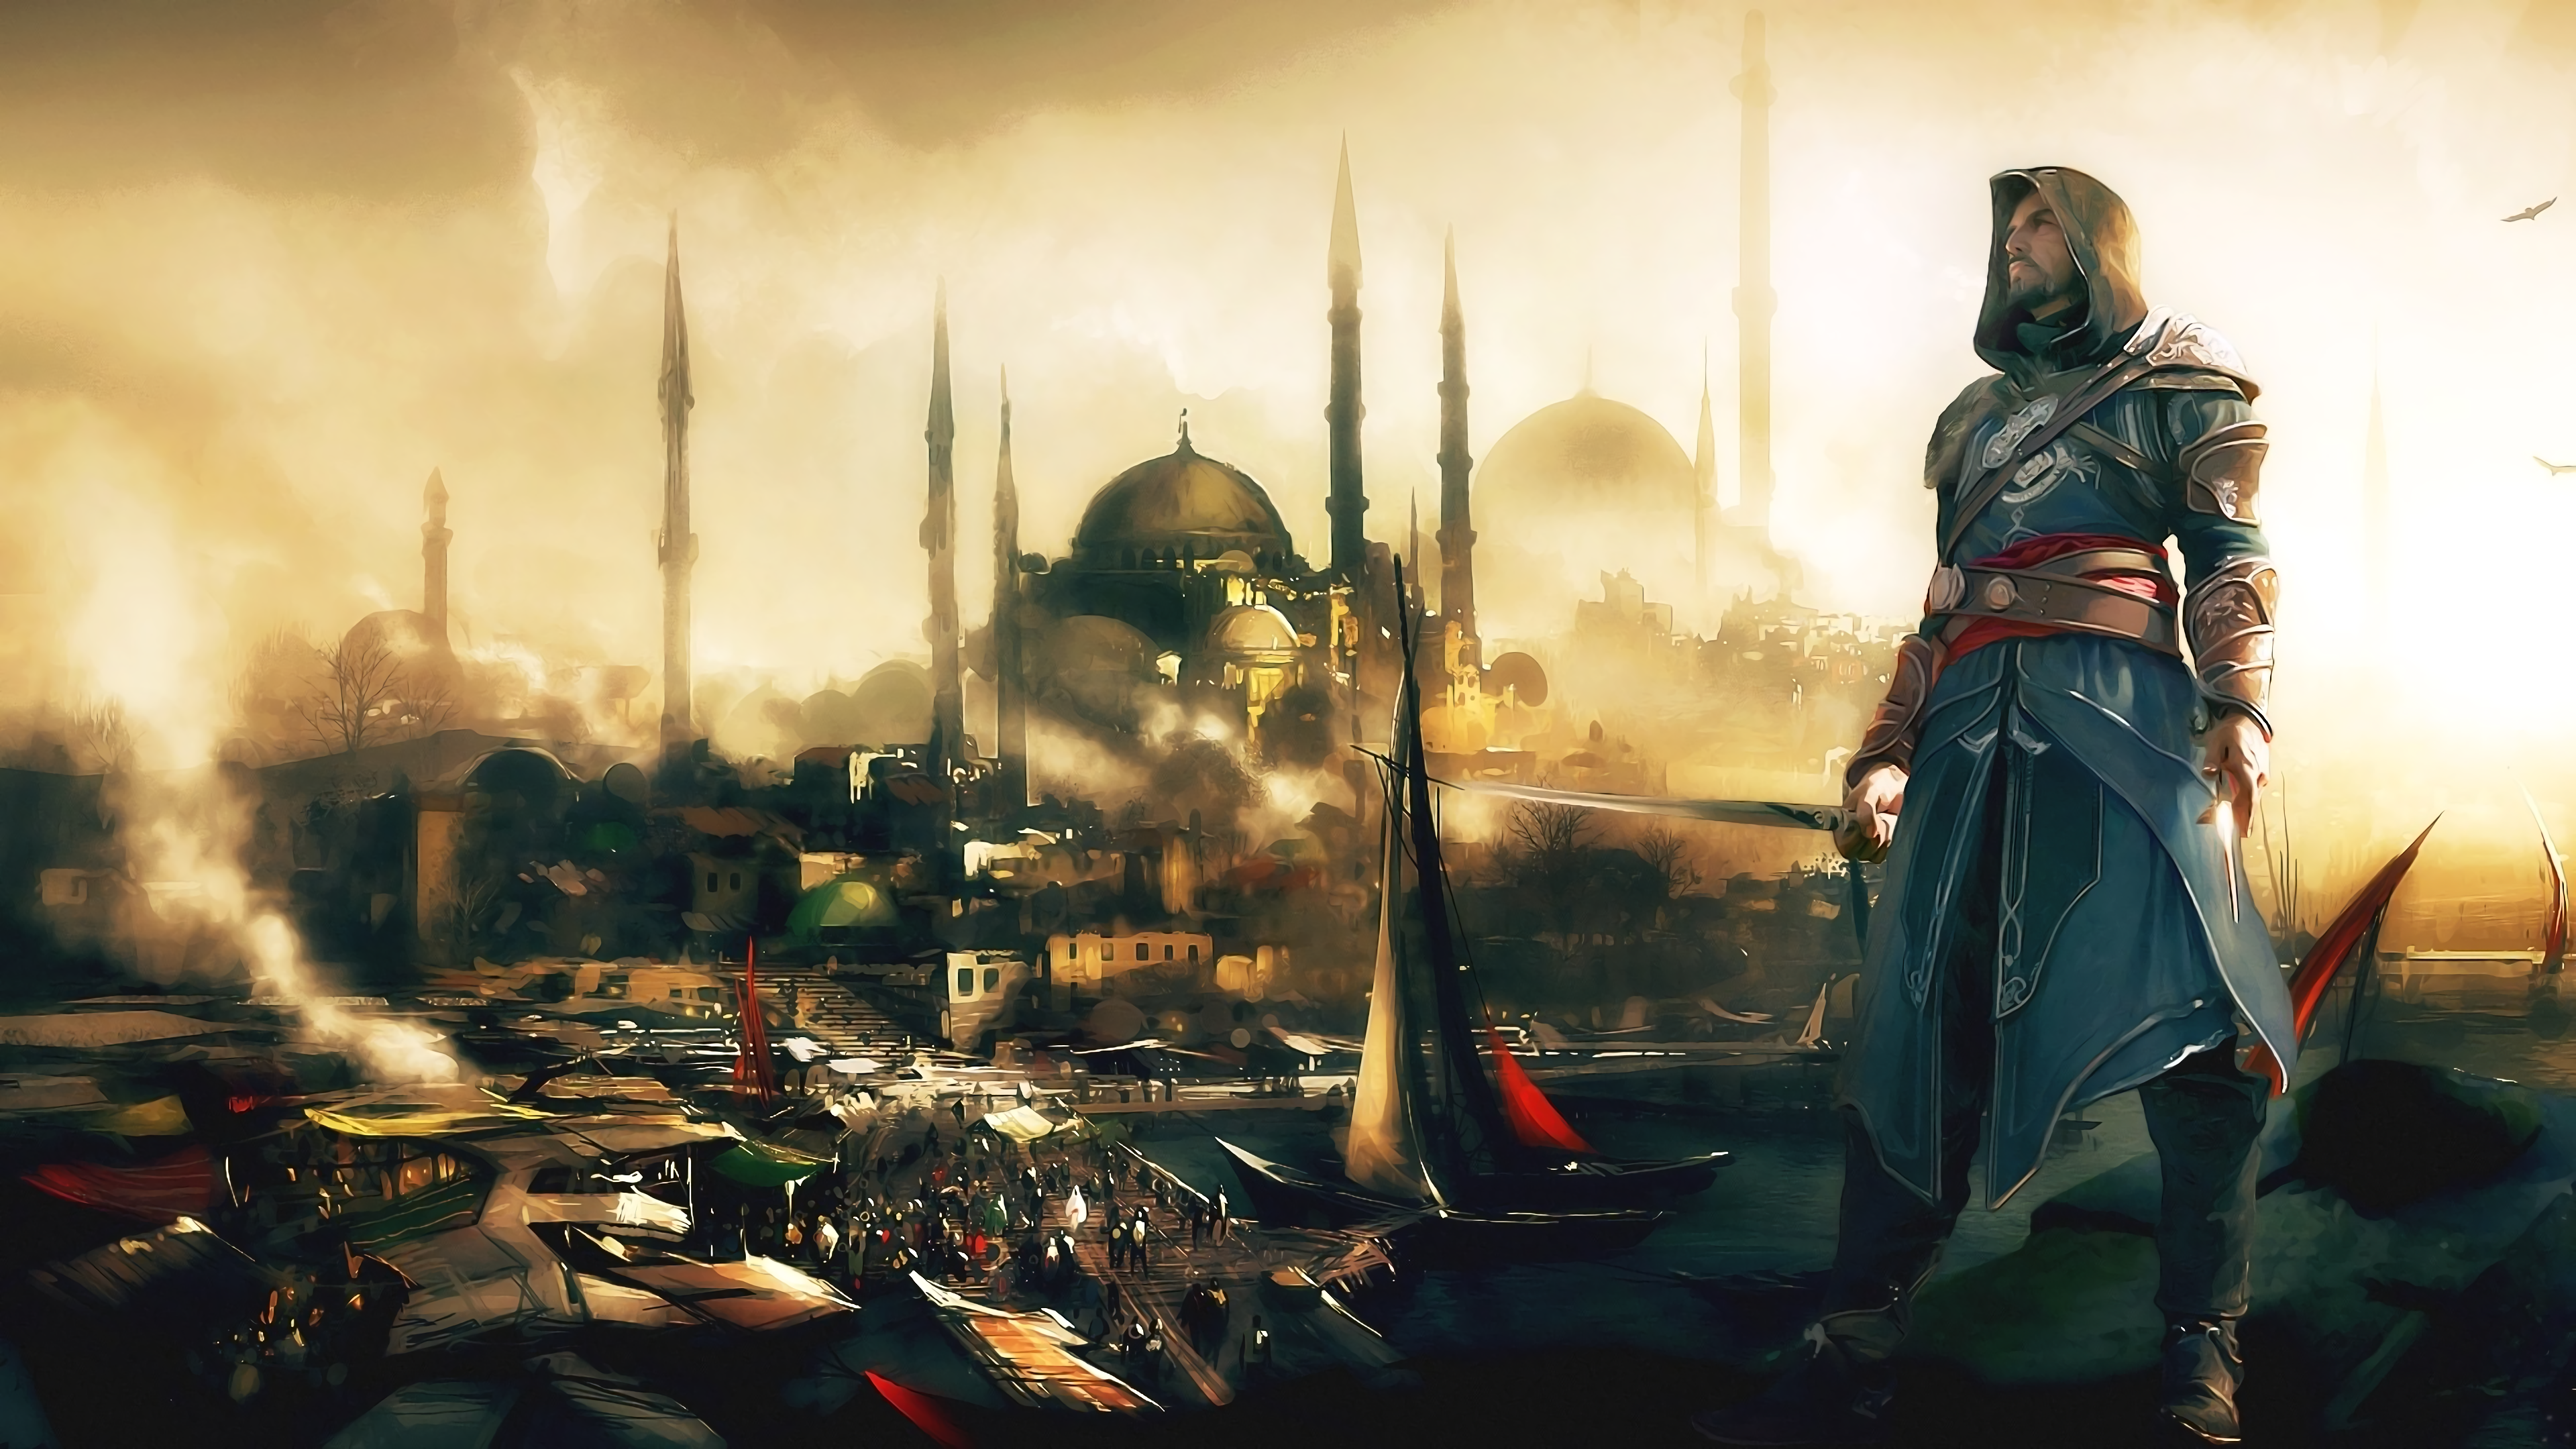 General 3840x2160 Assassin's Creed Assassin's Creed: Revelations Ezio Auditore da Firenze video game characters video games PC gaming video game man video game art